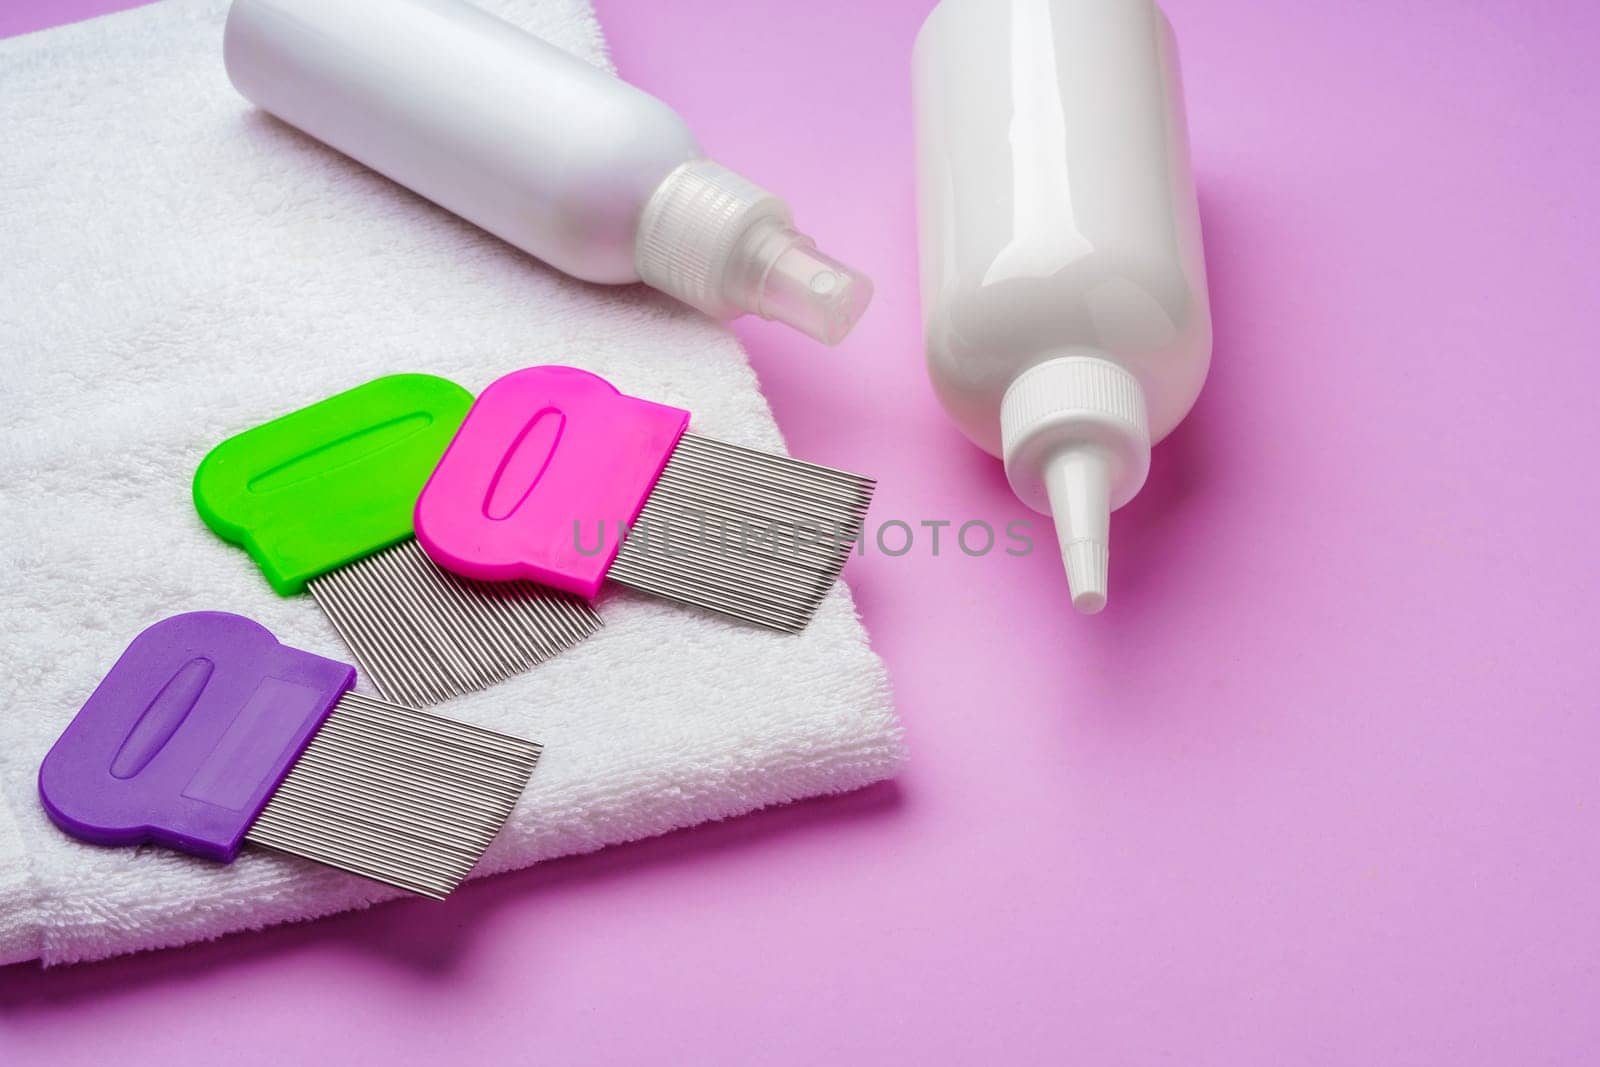 Anti lice combs and towel on pink background by Fabrikasimf